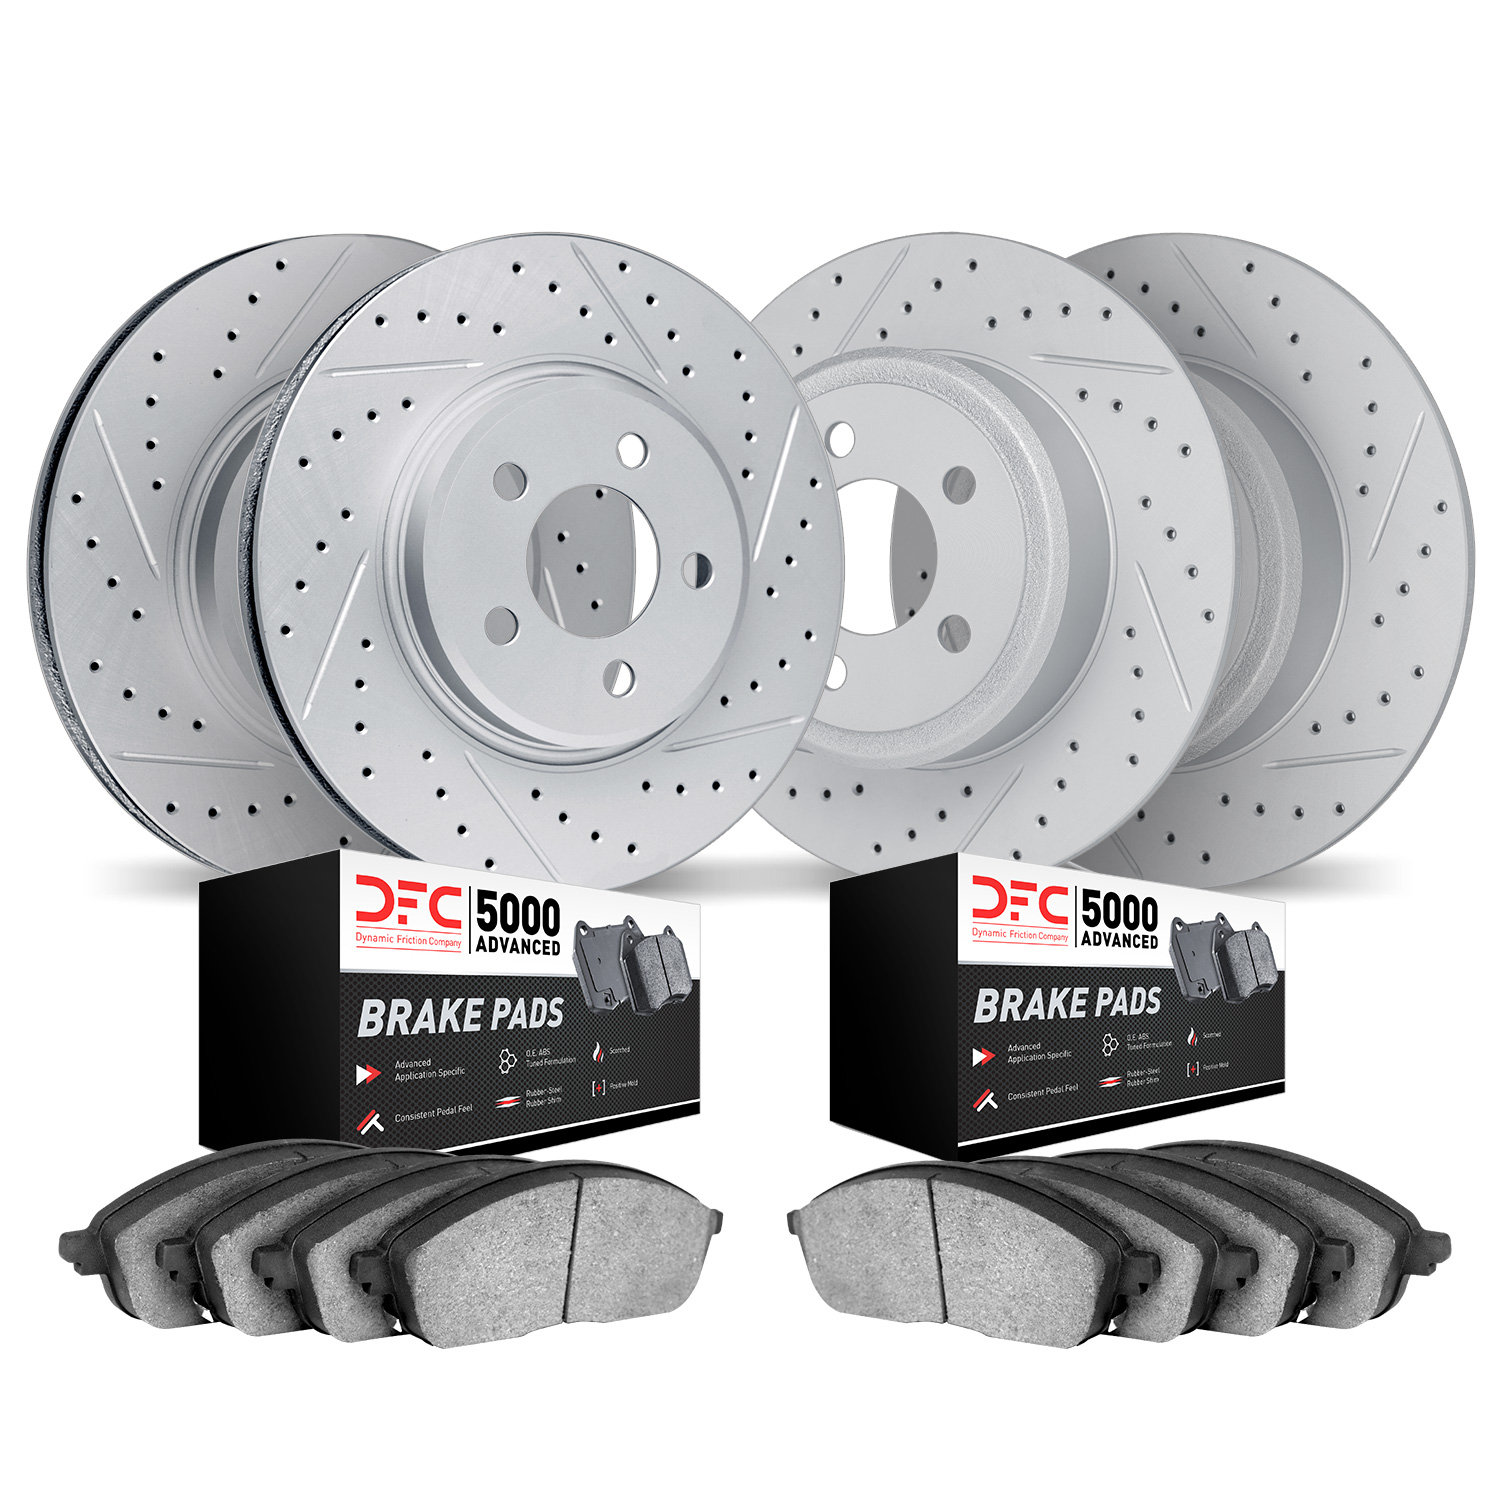 2504-45017 Geoperformance Drilled/Slotted Rotors w/5000 Advanced Brake Pads Kit, 2006-2011 GM, Position: Front and Rear